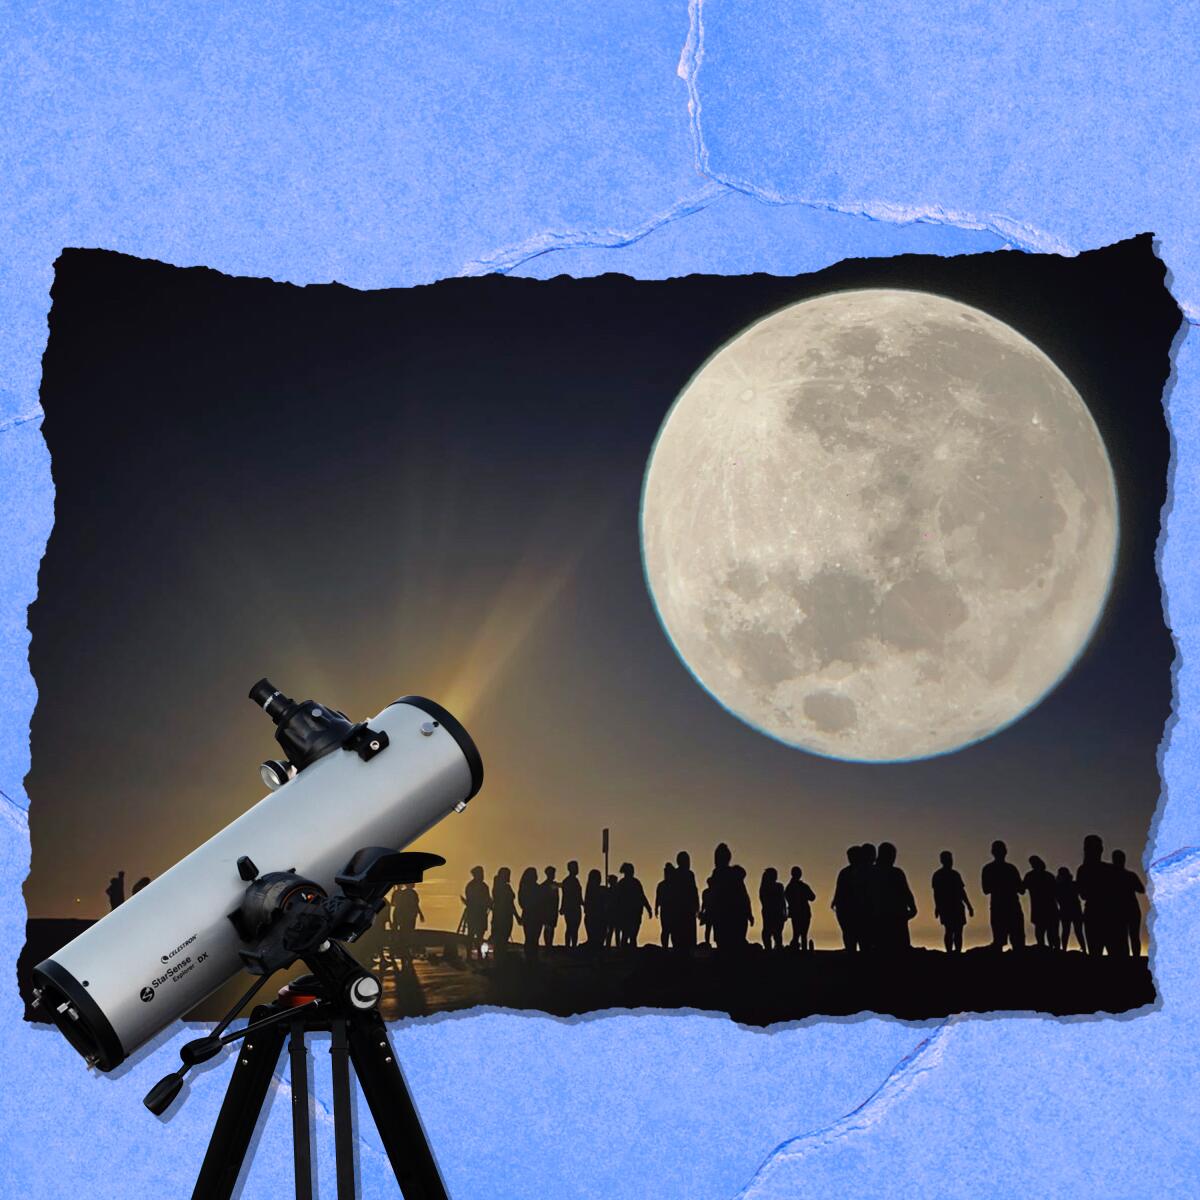 An illustration of a telescope pointed at a large moon.